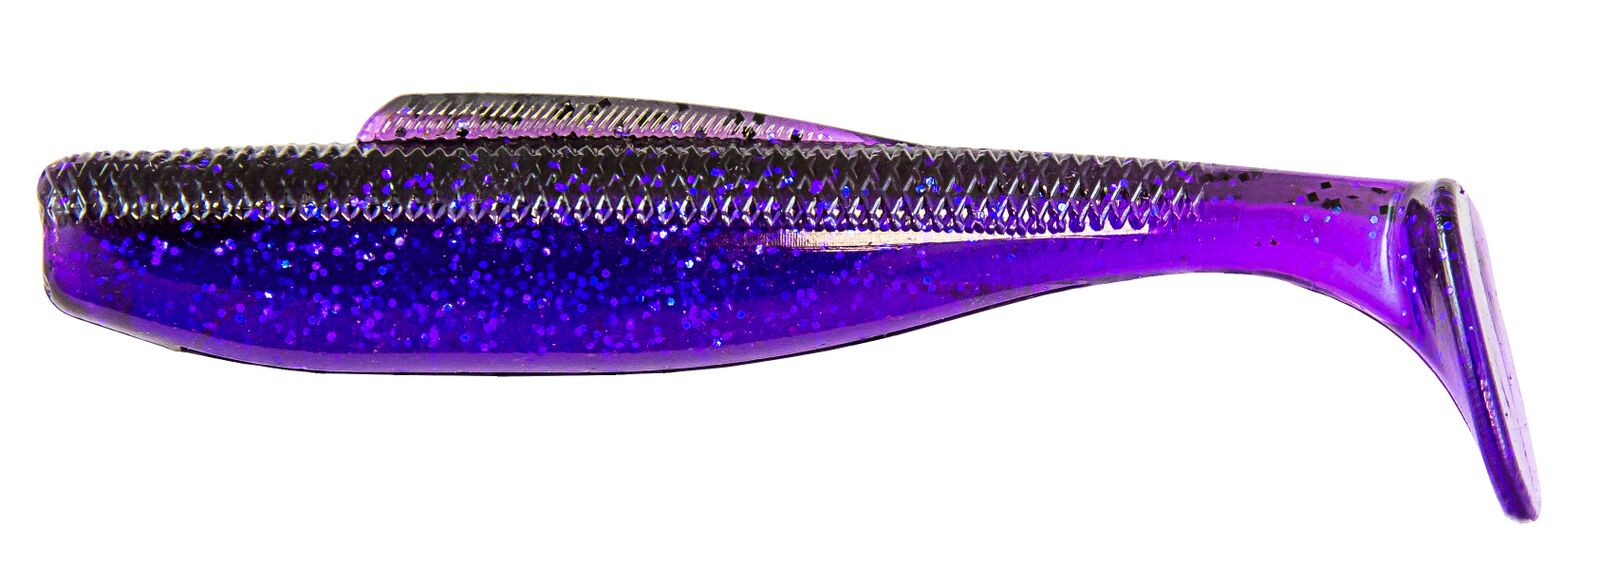 FIIISH CRAZY PADDLE TAIL SPINNING LURE 120mm 7-15gr NEW 2023